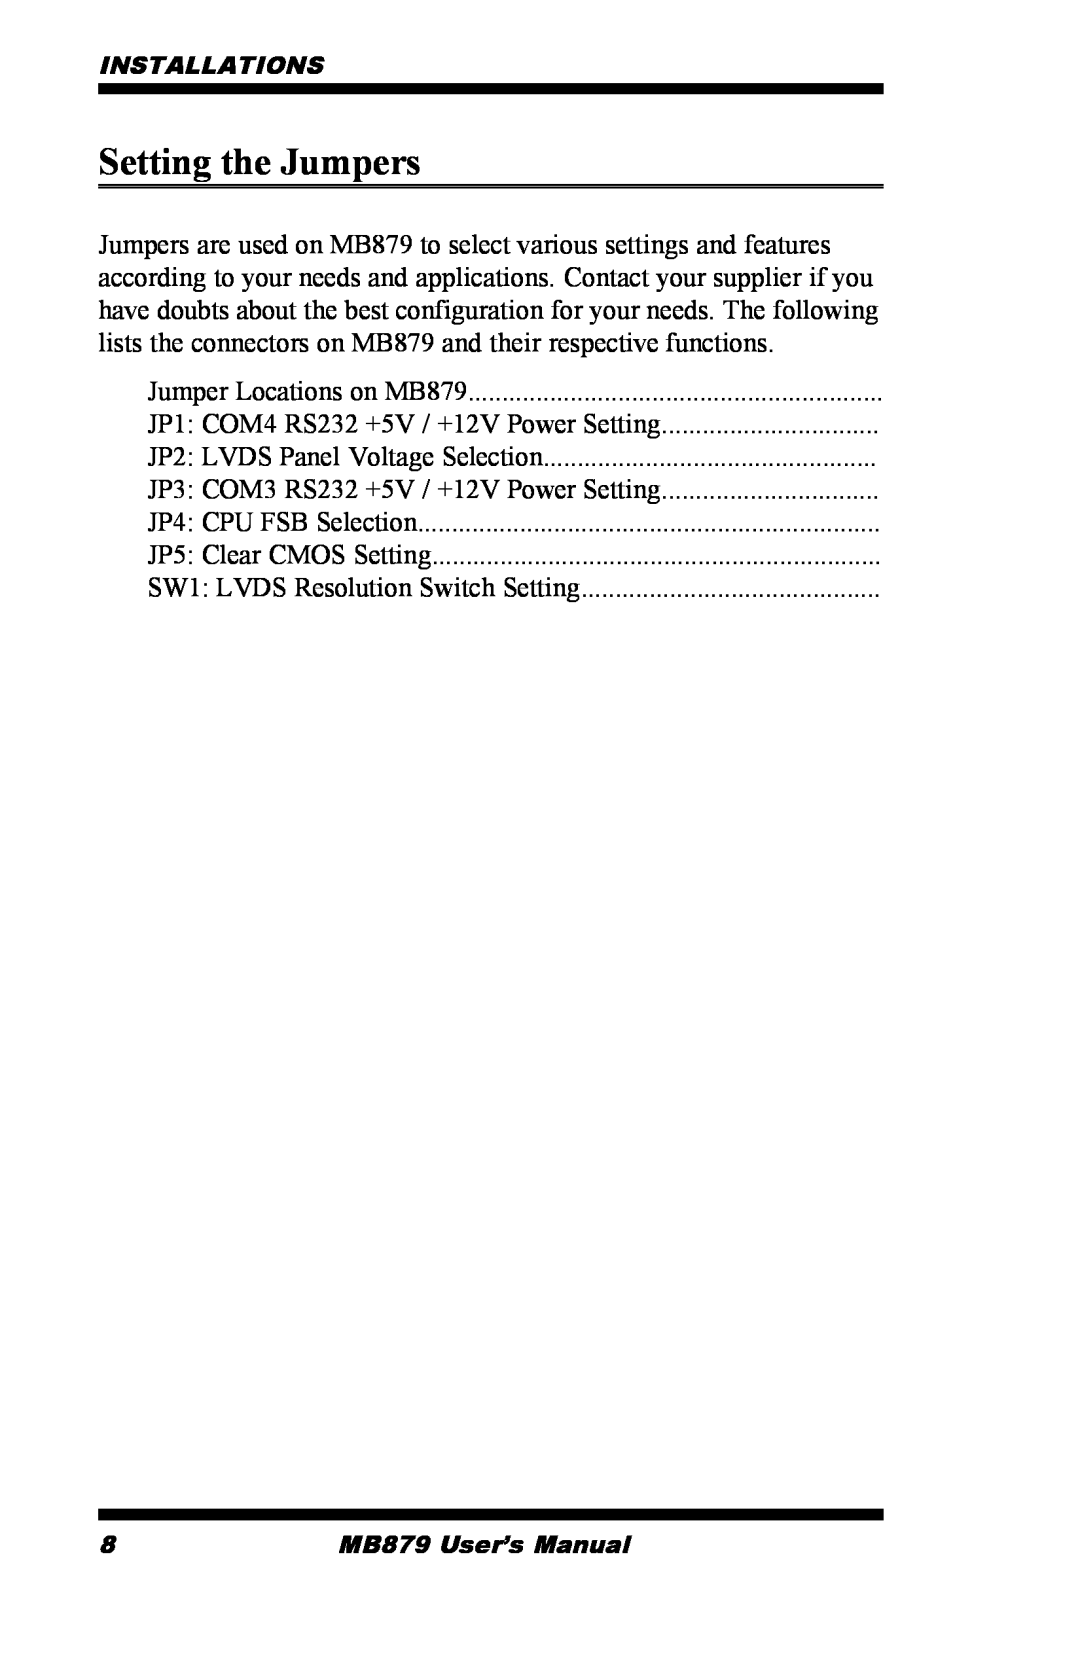 Intel MB879 user manual Setting the Jumpers 